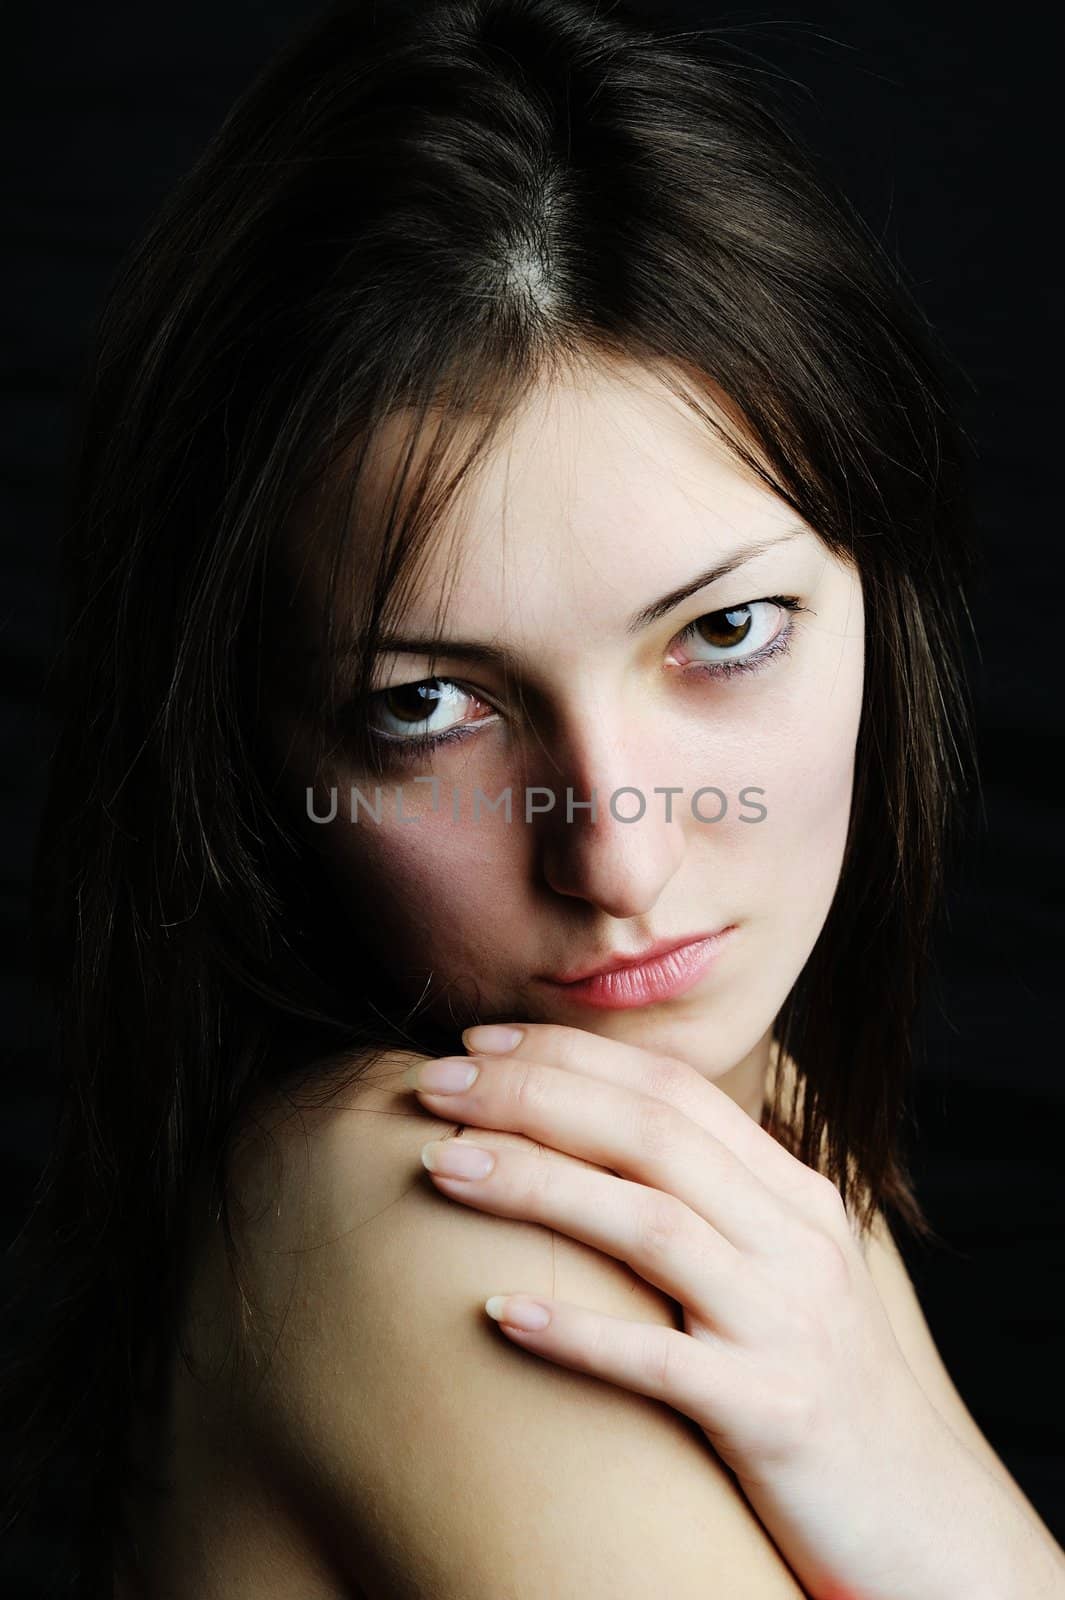 An image of a young beautiful woman close-up